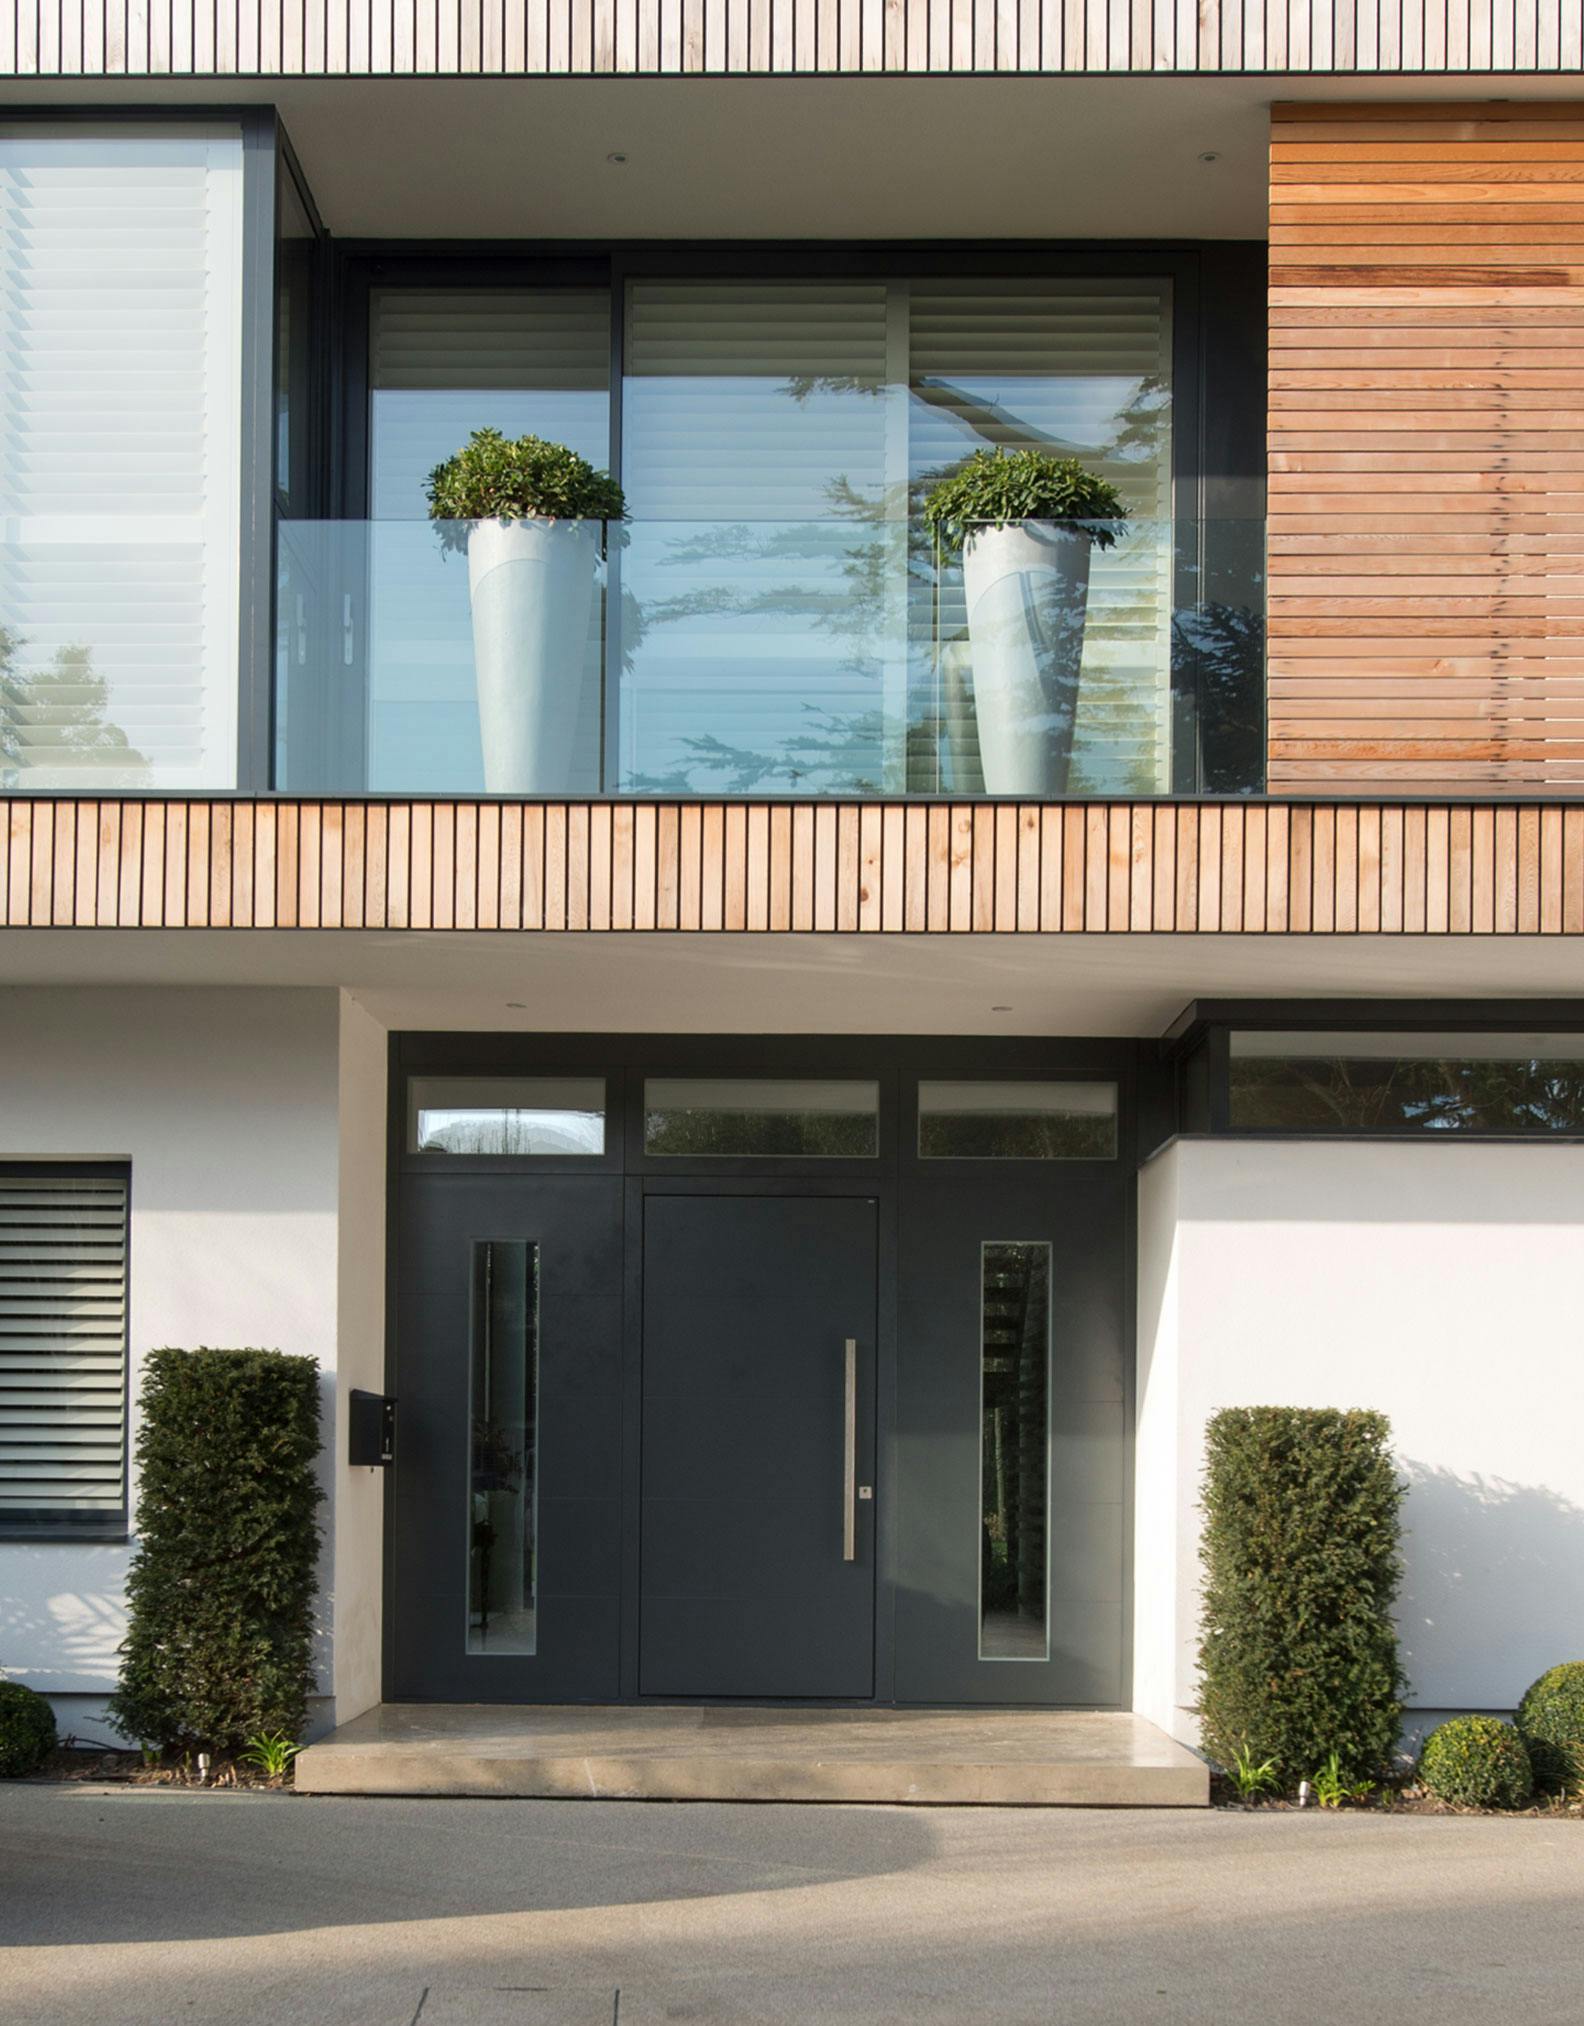 Luxurious, modern house featuring a modern entrance door by Deuren - Pianura 2 is a slab style with an anthracite paint finish